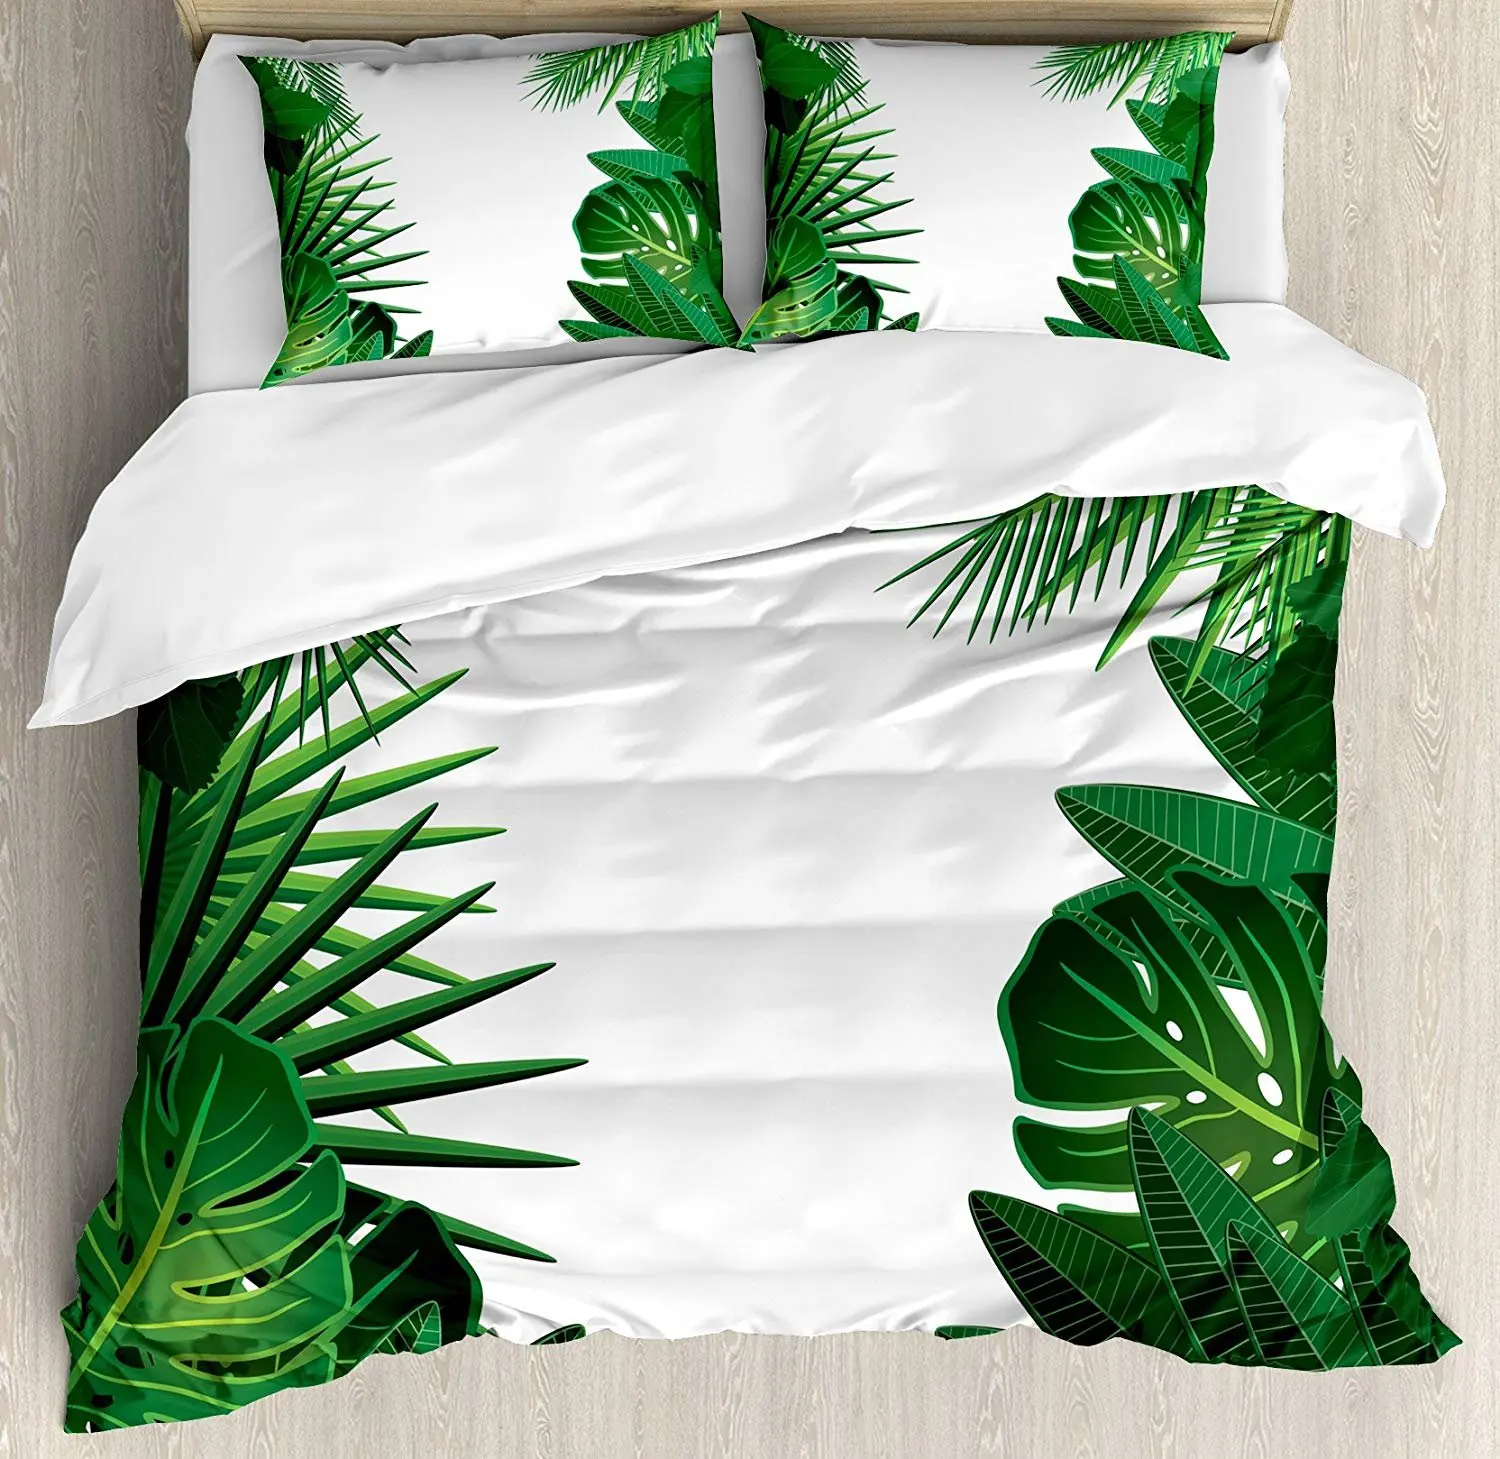 

Leaves Bedding Set Exotic Fantasy Hawaiian Tropical Palm Leaves with Stylish Floral Graphic Art Duvet Cover Pillowcase Bed Set